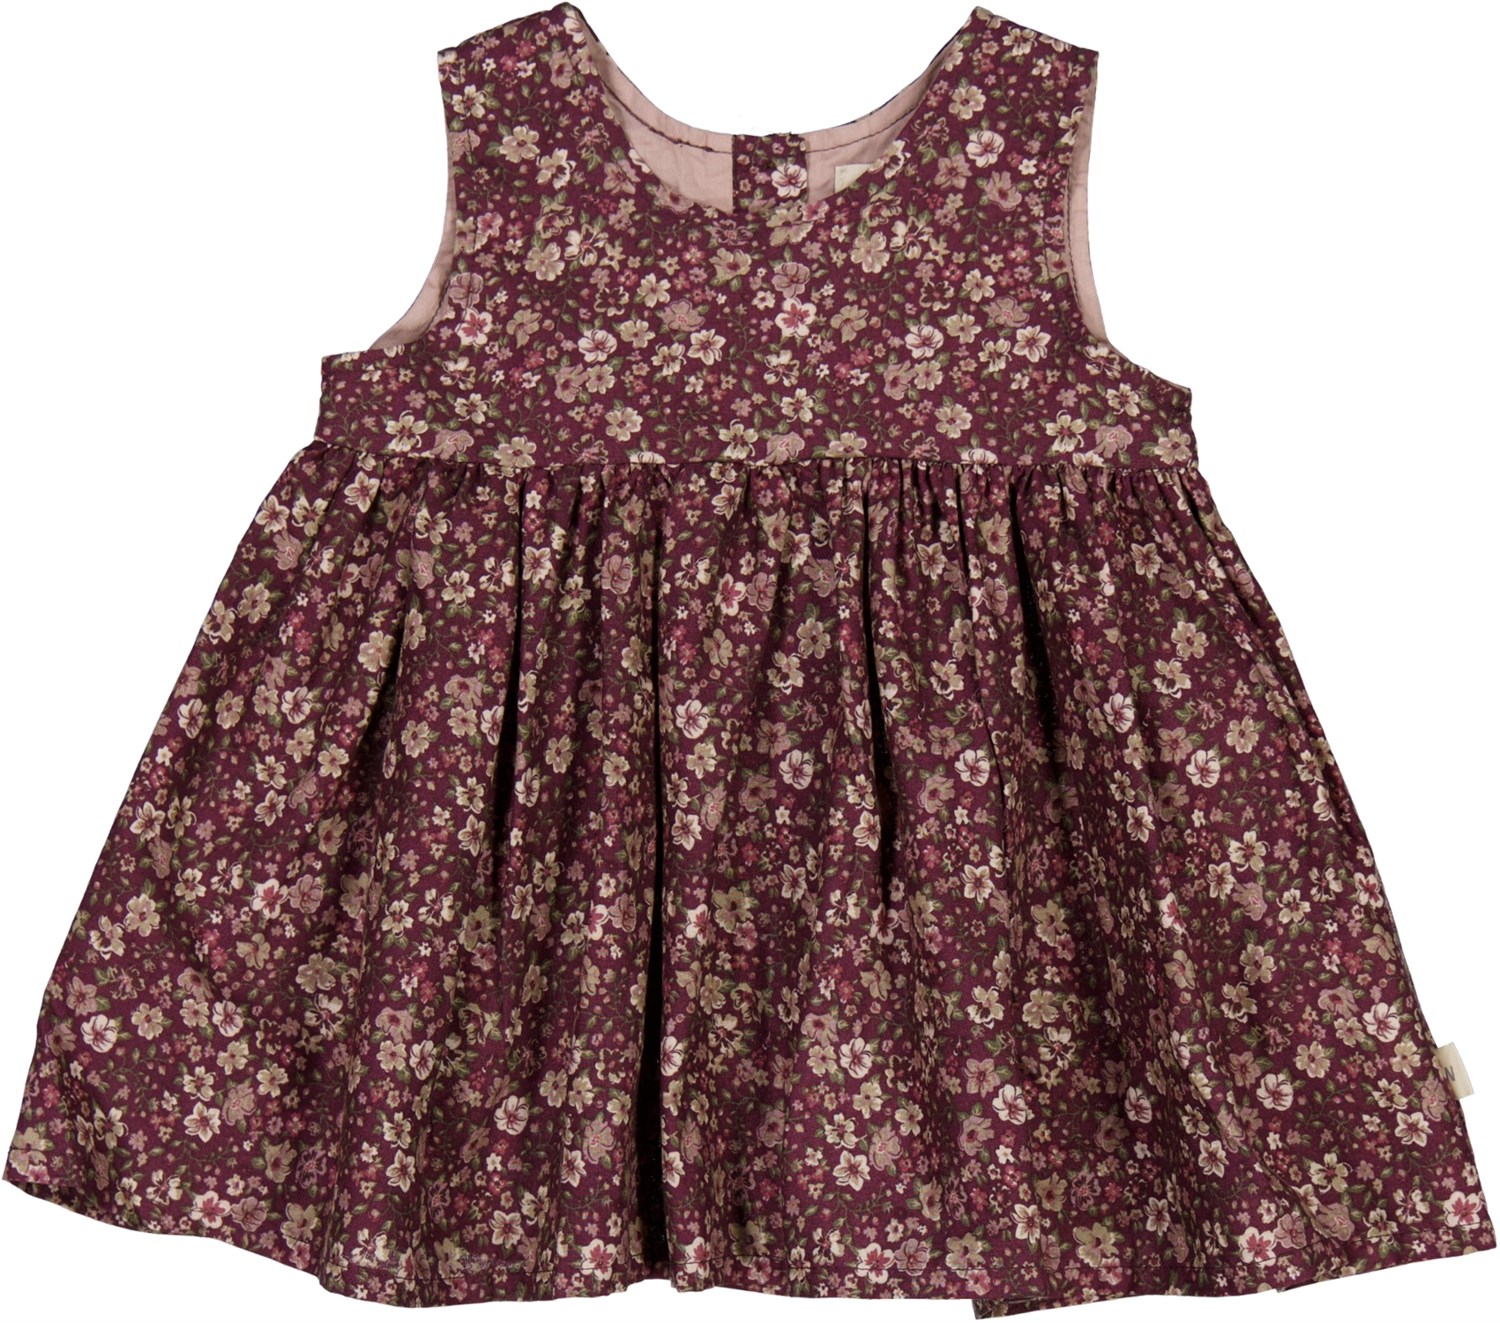 Wheat pinafore dress Mulberry flowers